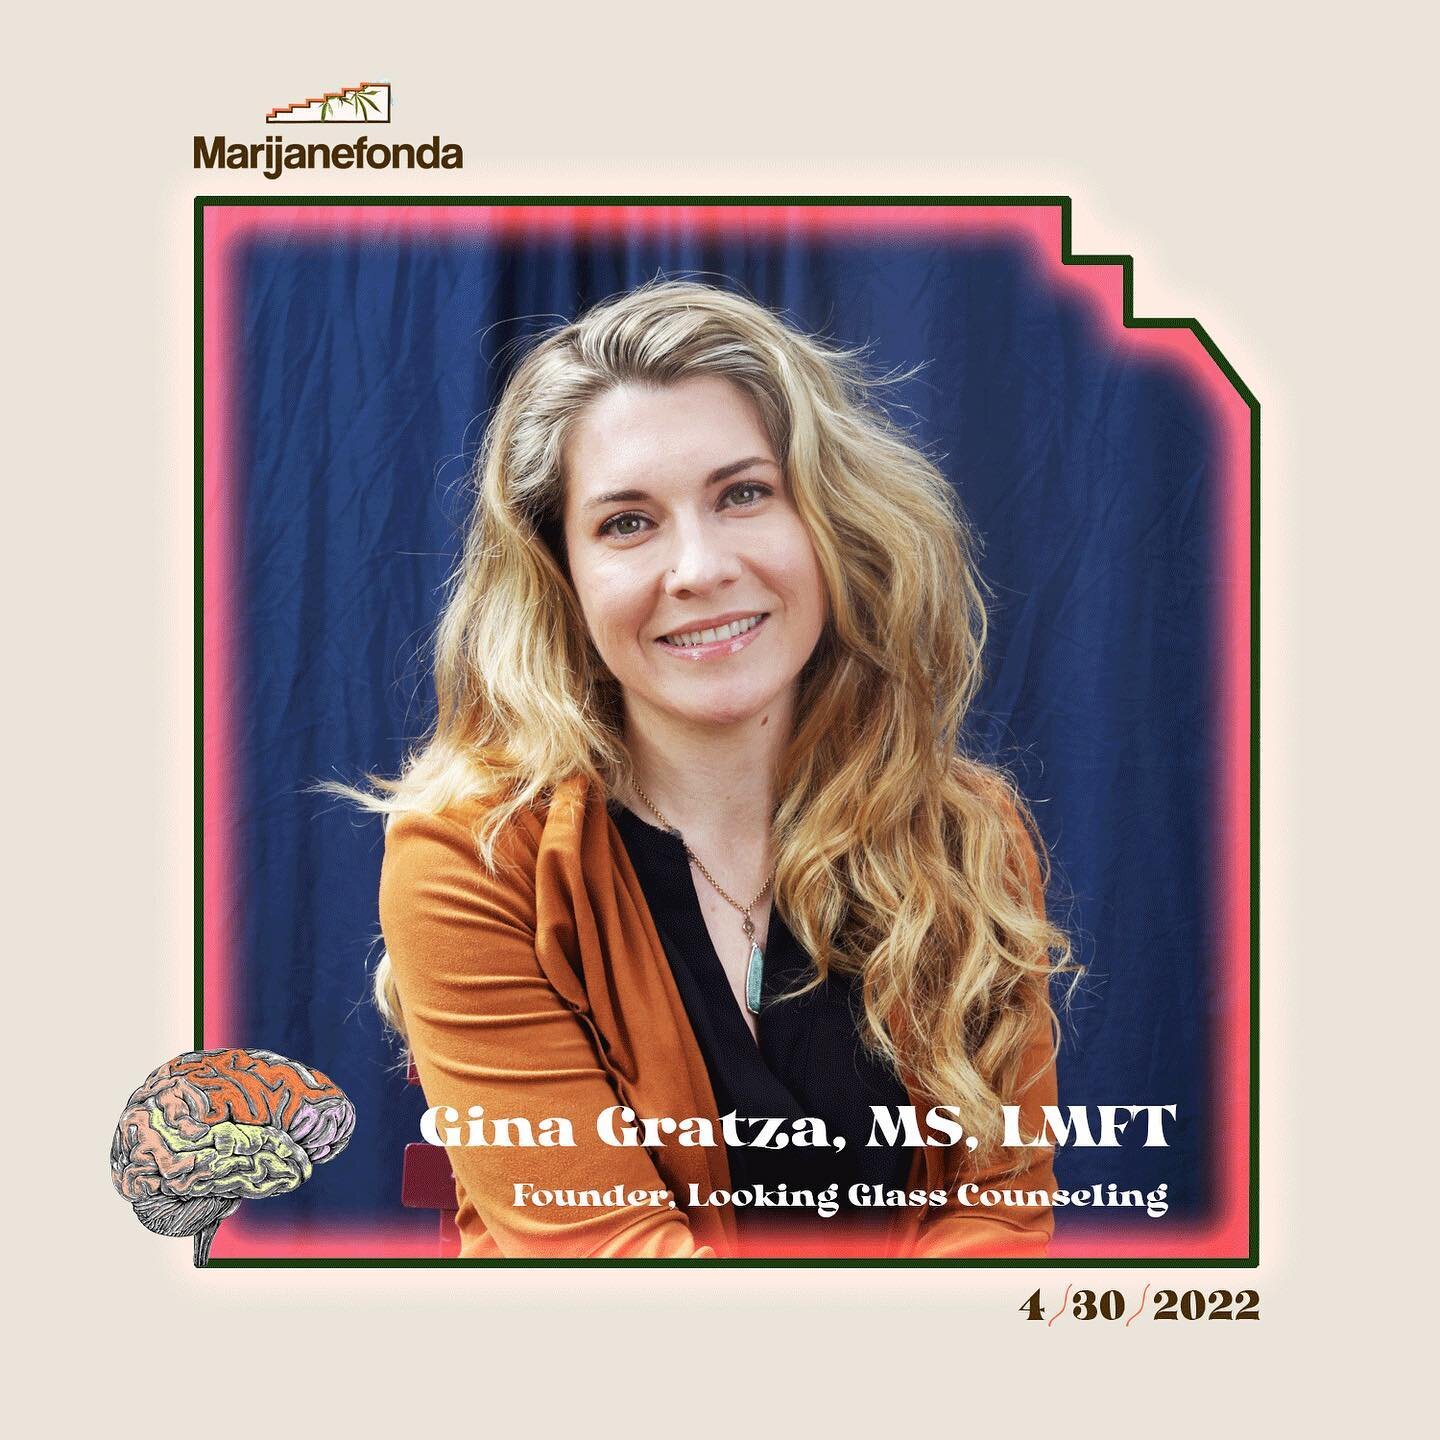 Gina Gratza believes in the power of healing through compassion and connection. She&rsquo;s a licensed marriage and family therapist in private practice specializing in somatic therapies for the treatment of trauma, eating disorders and relationships